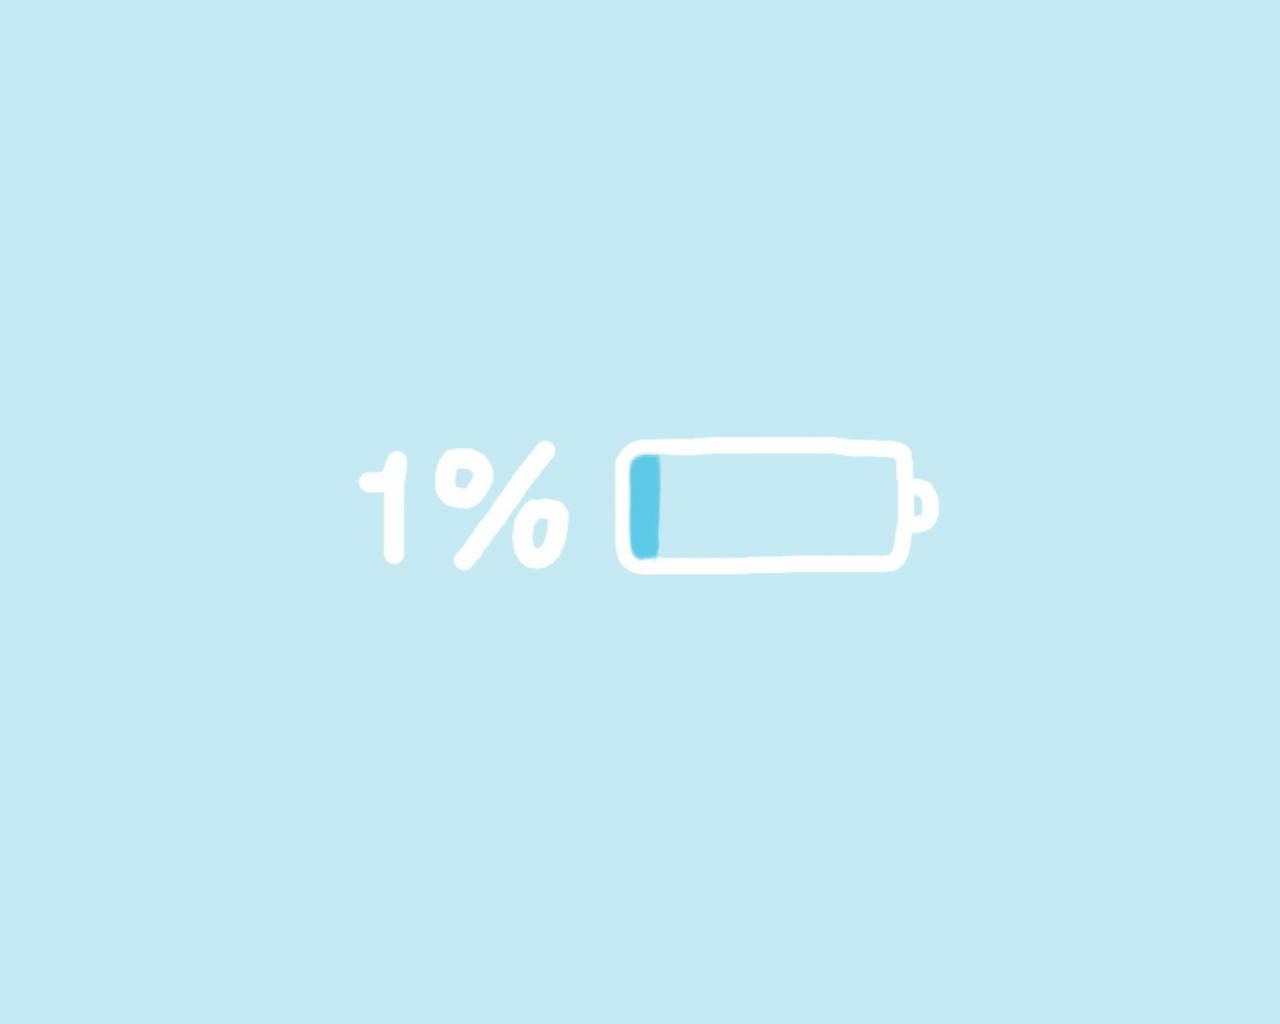 One Percent Battery Pastel Cute Background